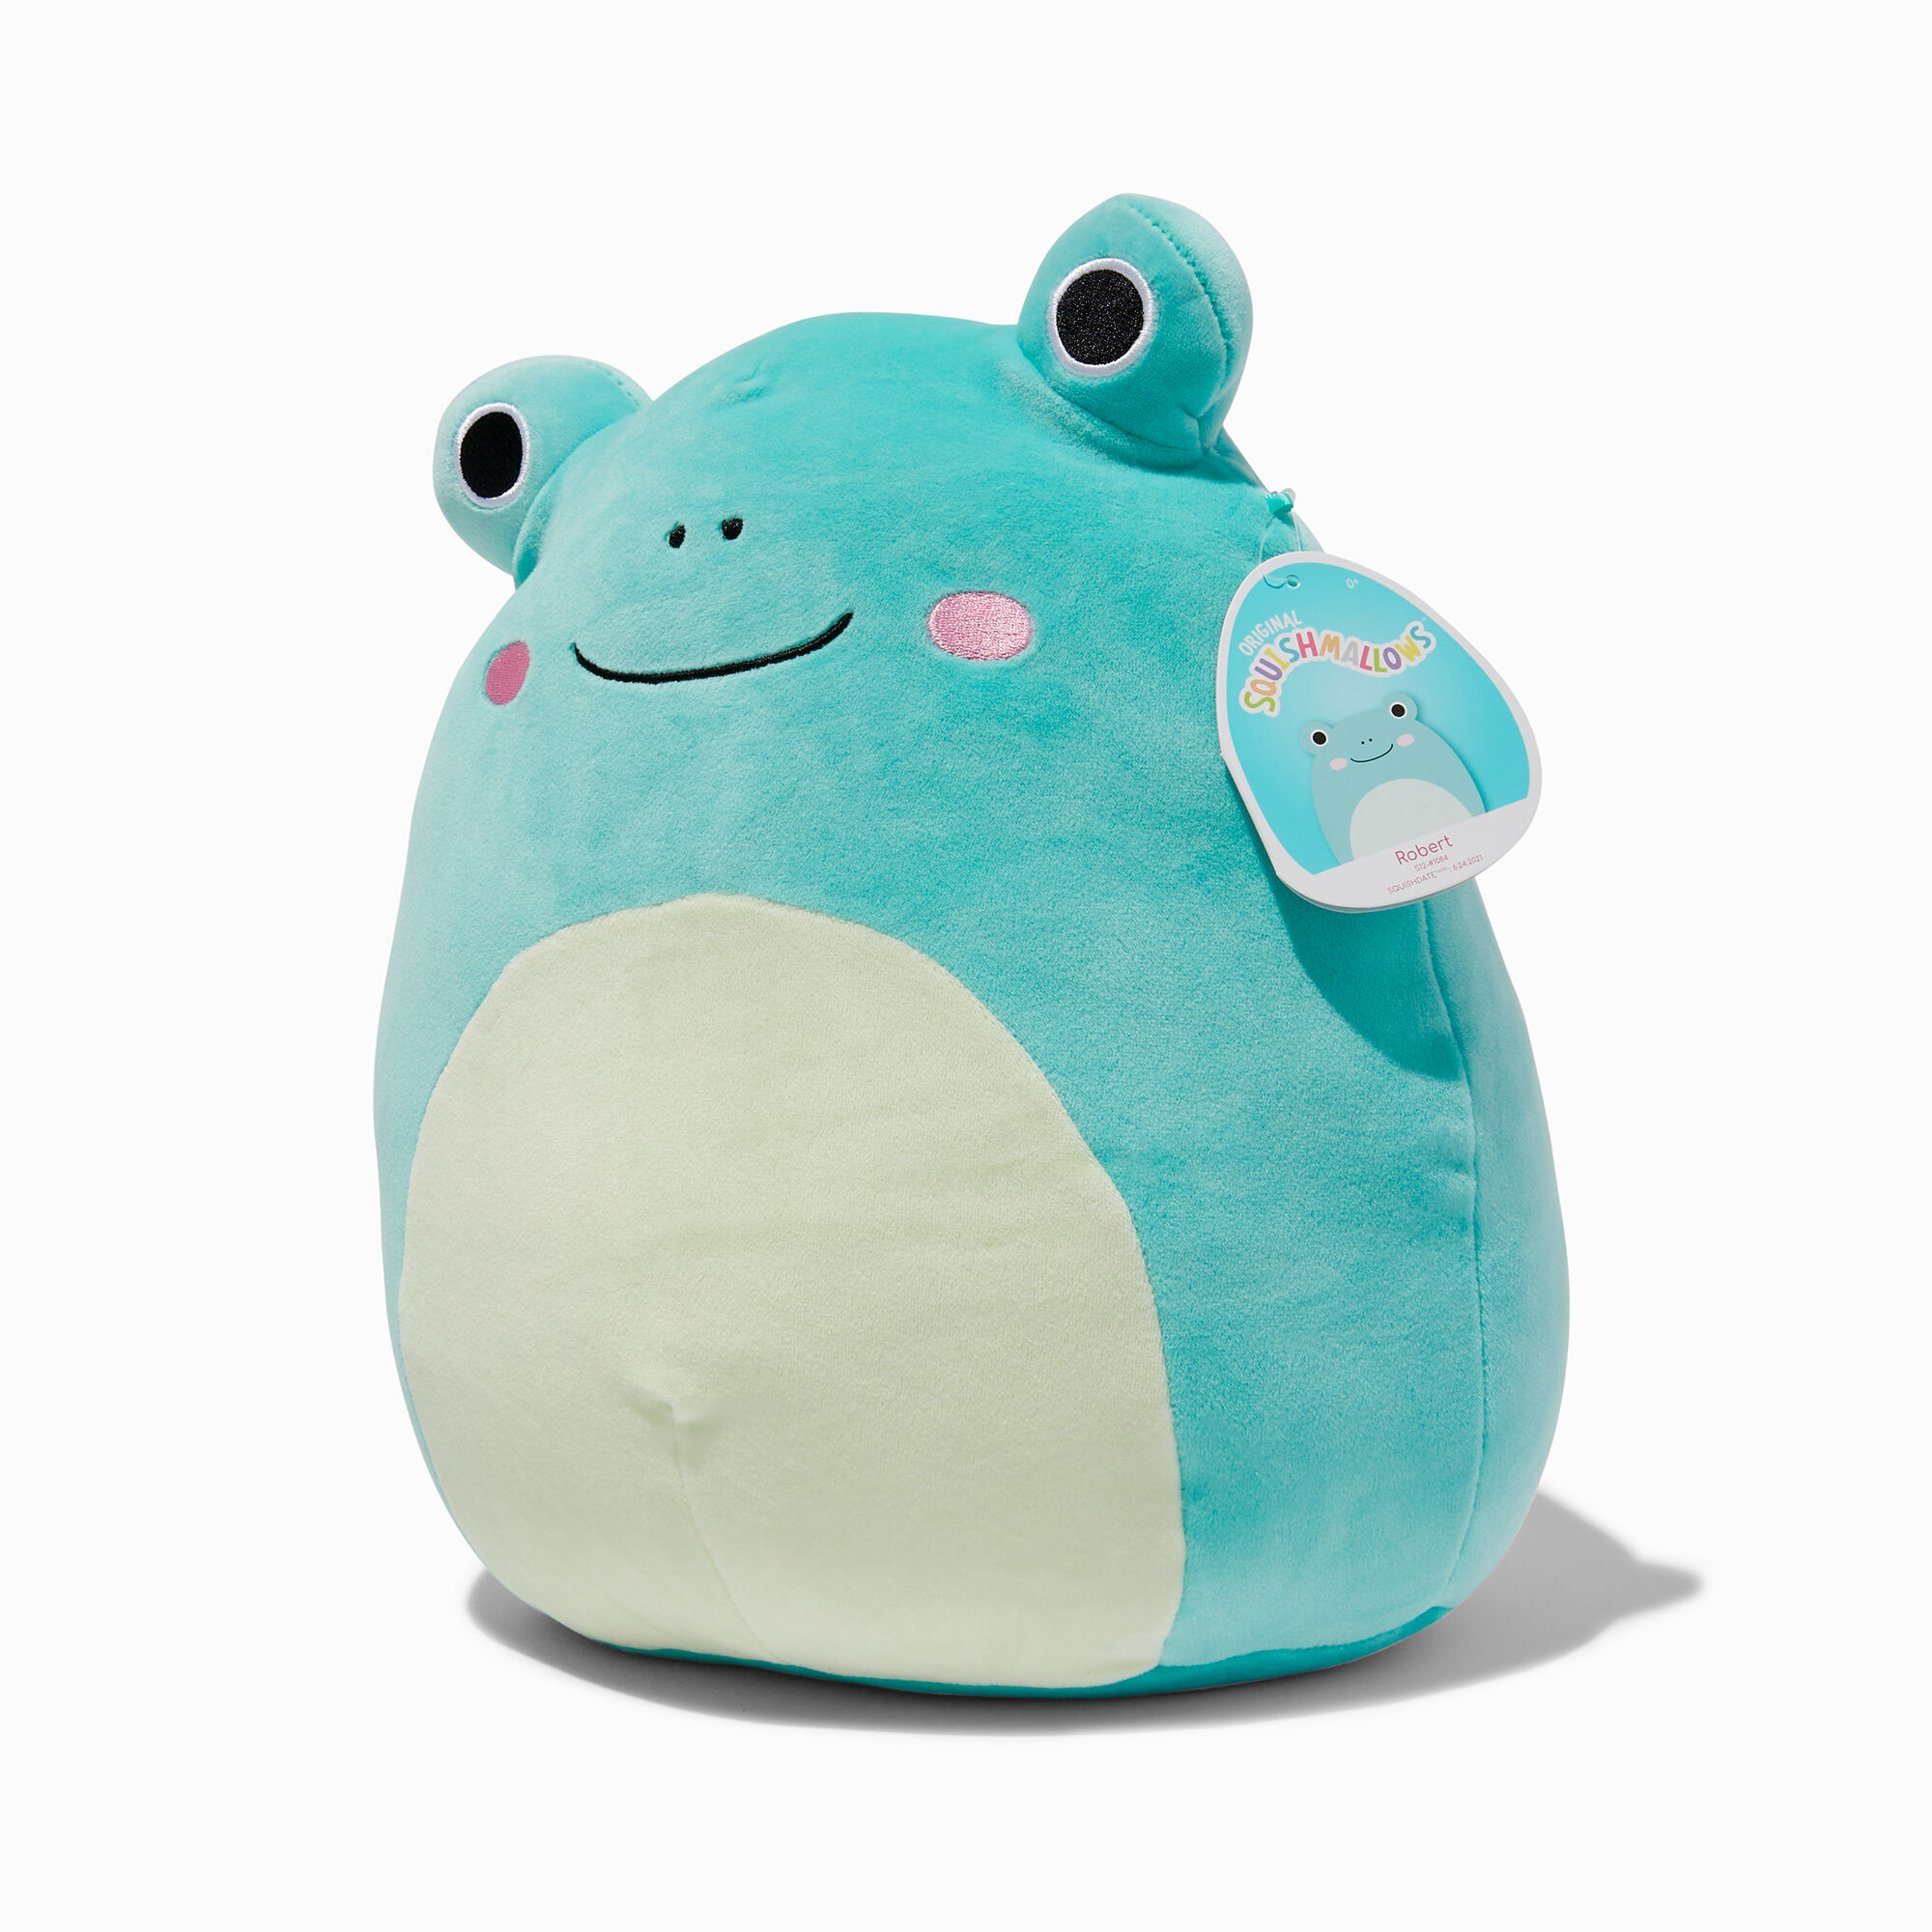 Squishmallows Official Kellytoy Squishy Soft Stuffed Plush Toy